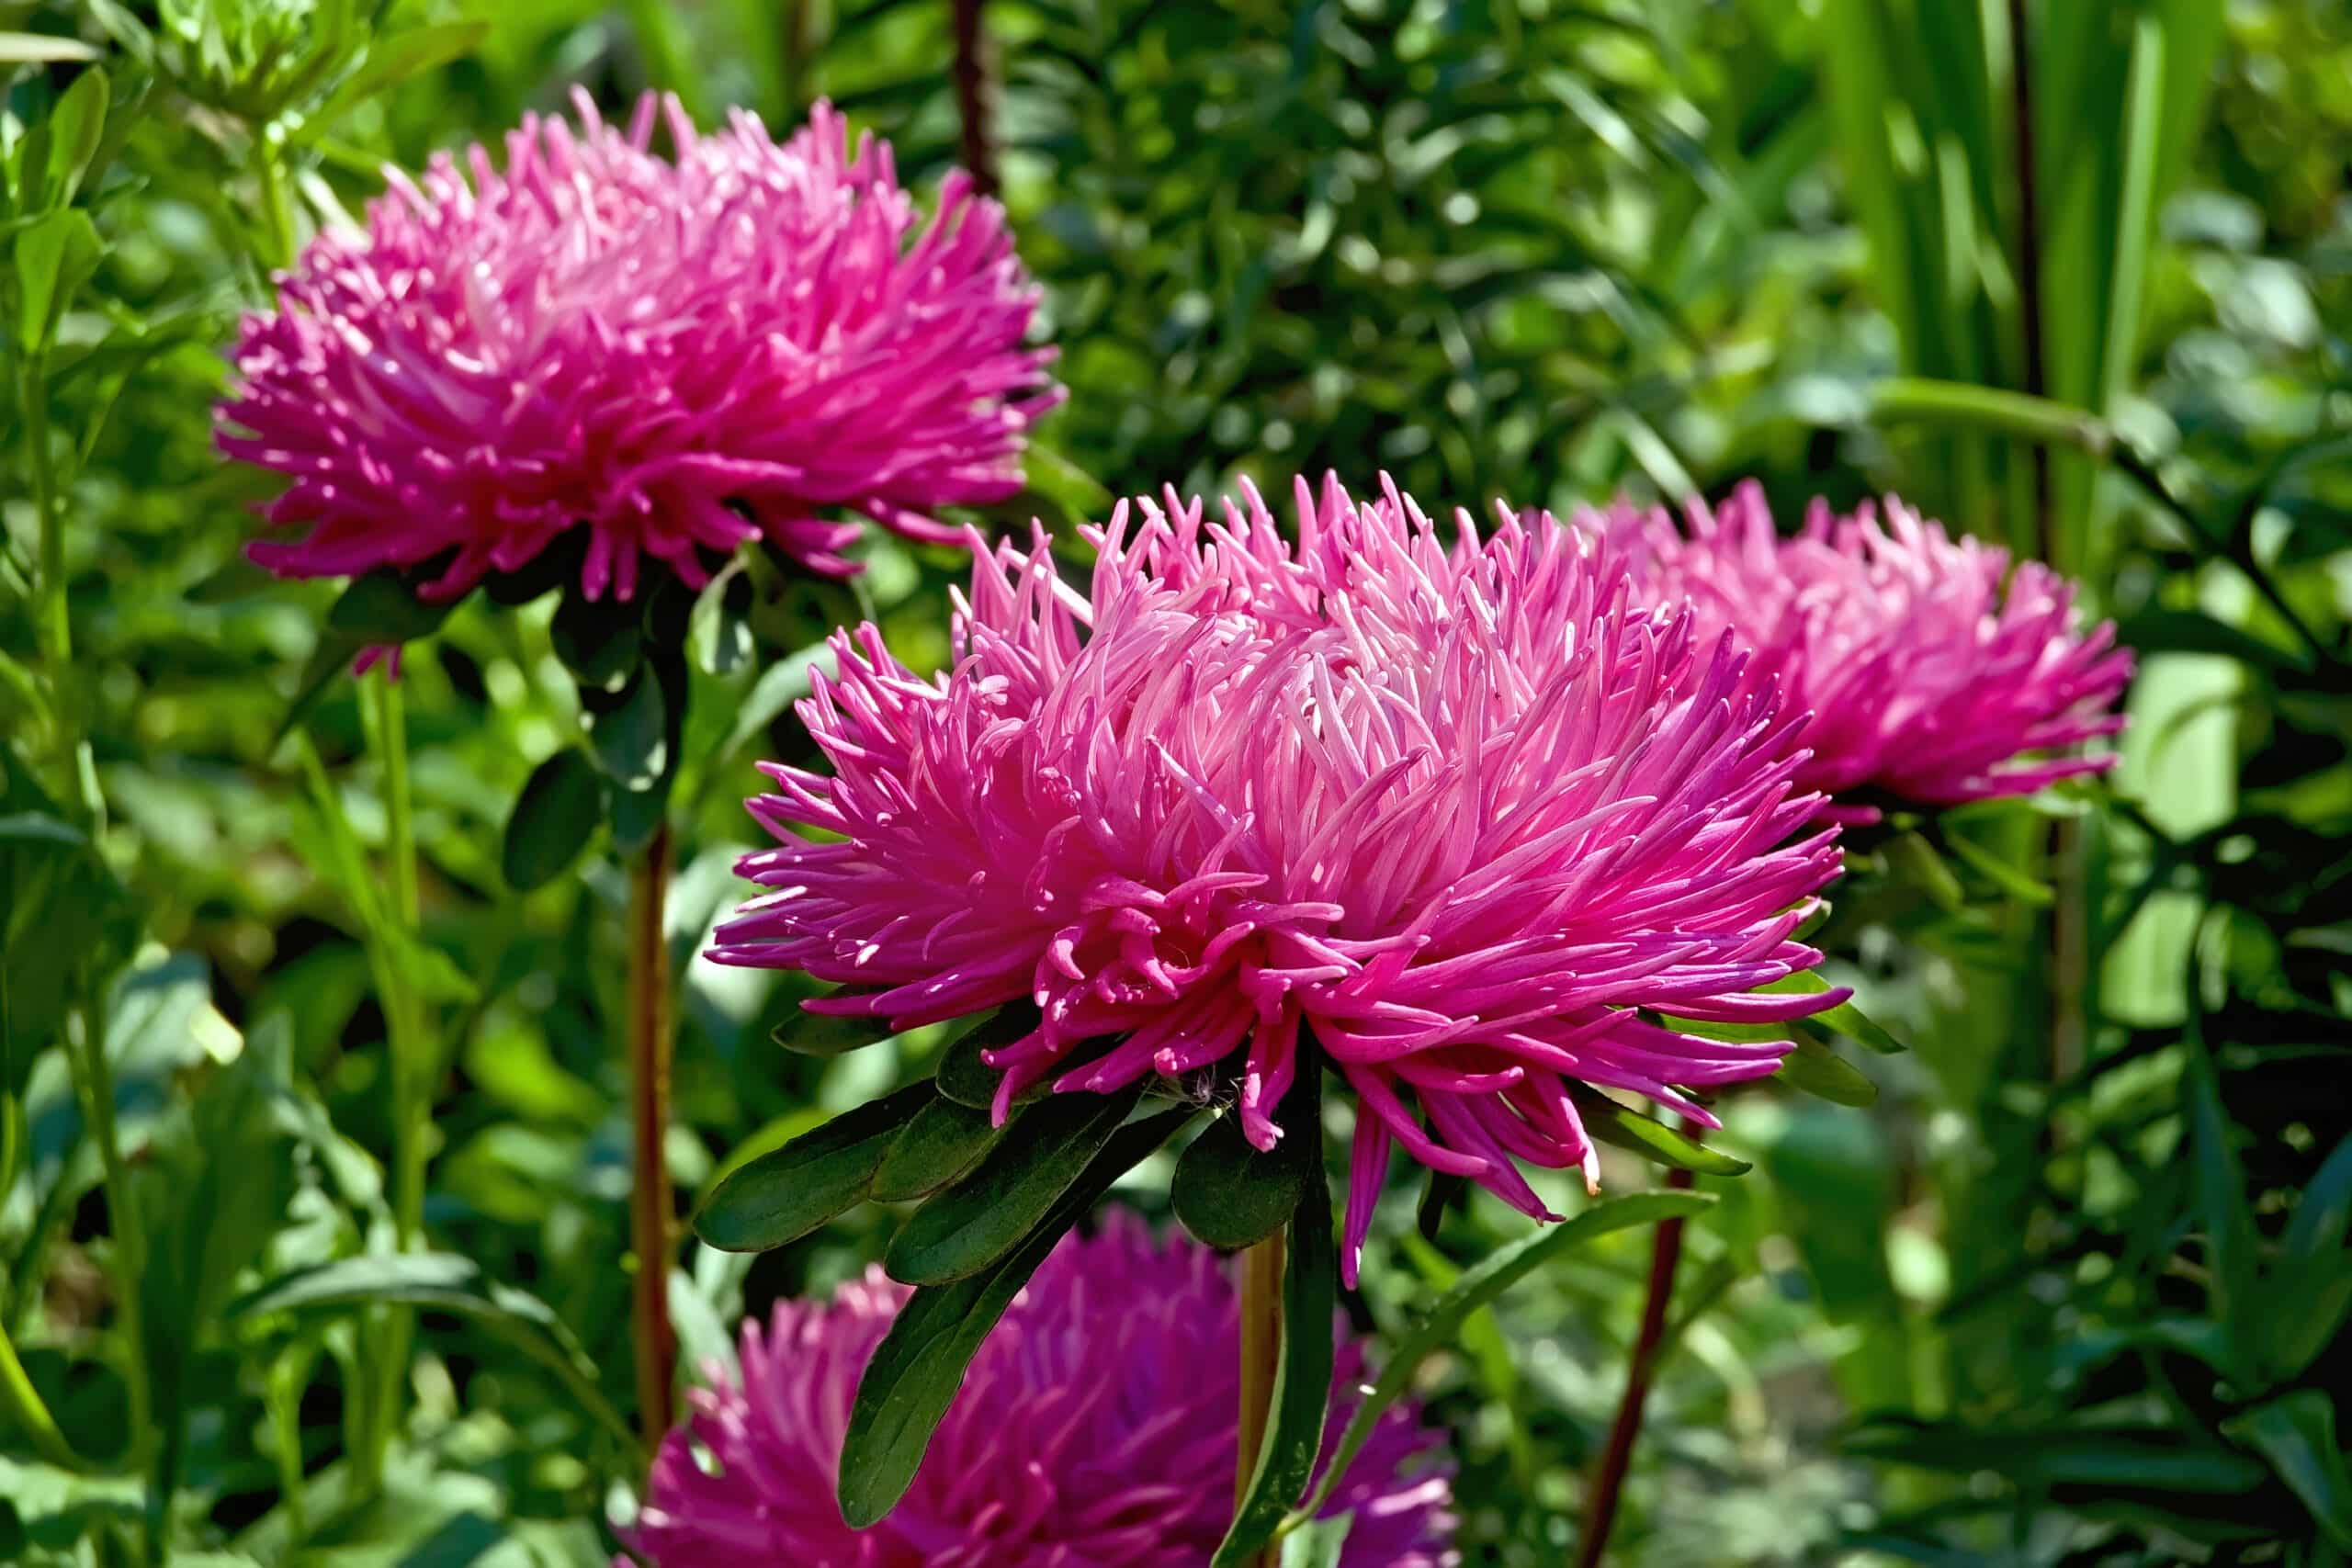 Bright pink asters flowers growing in Smart Pot on a background of green foliage